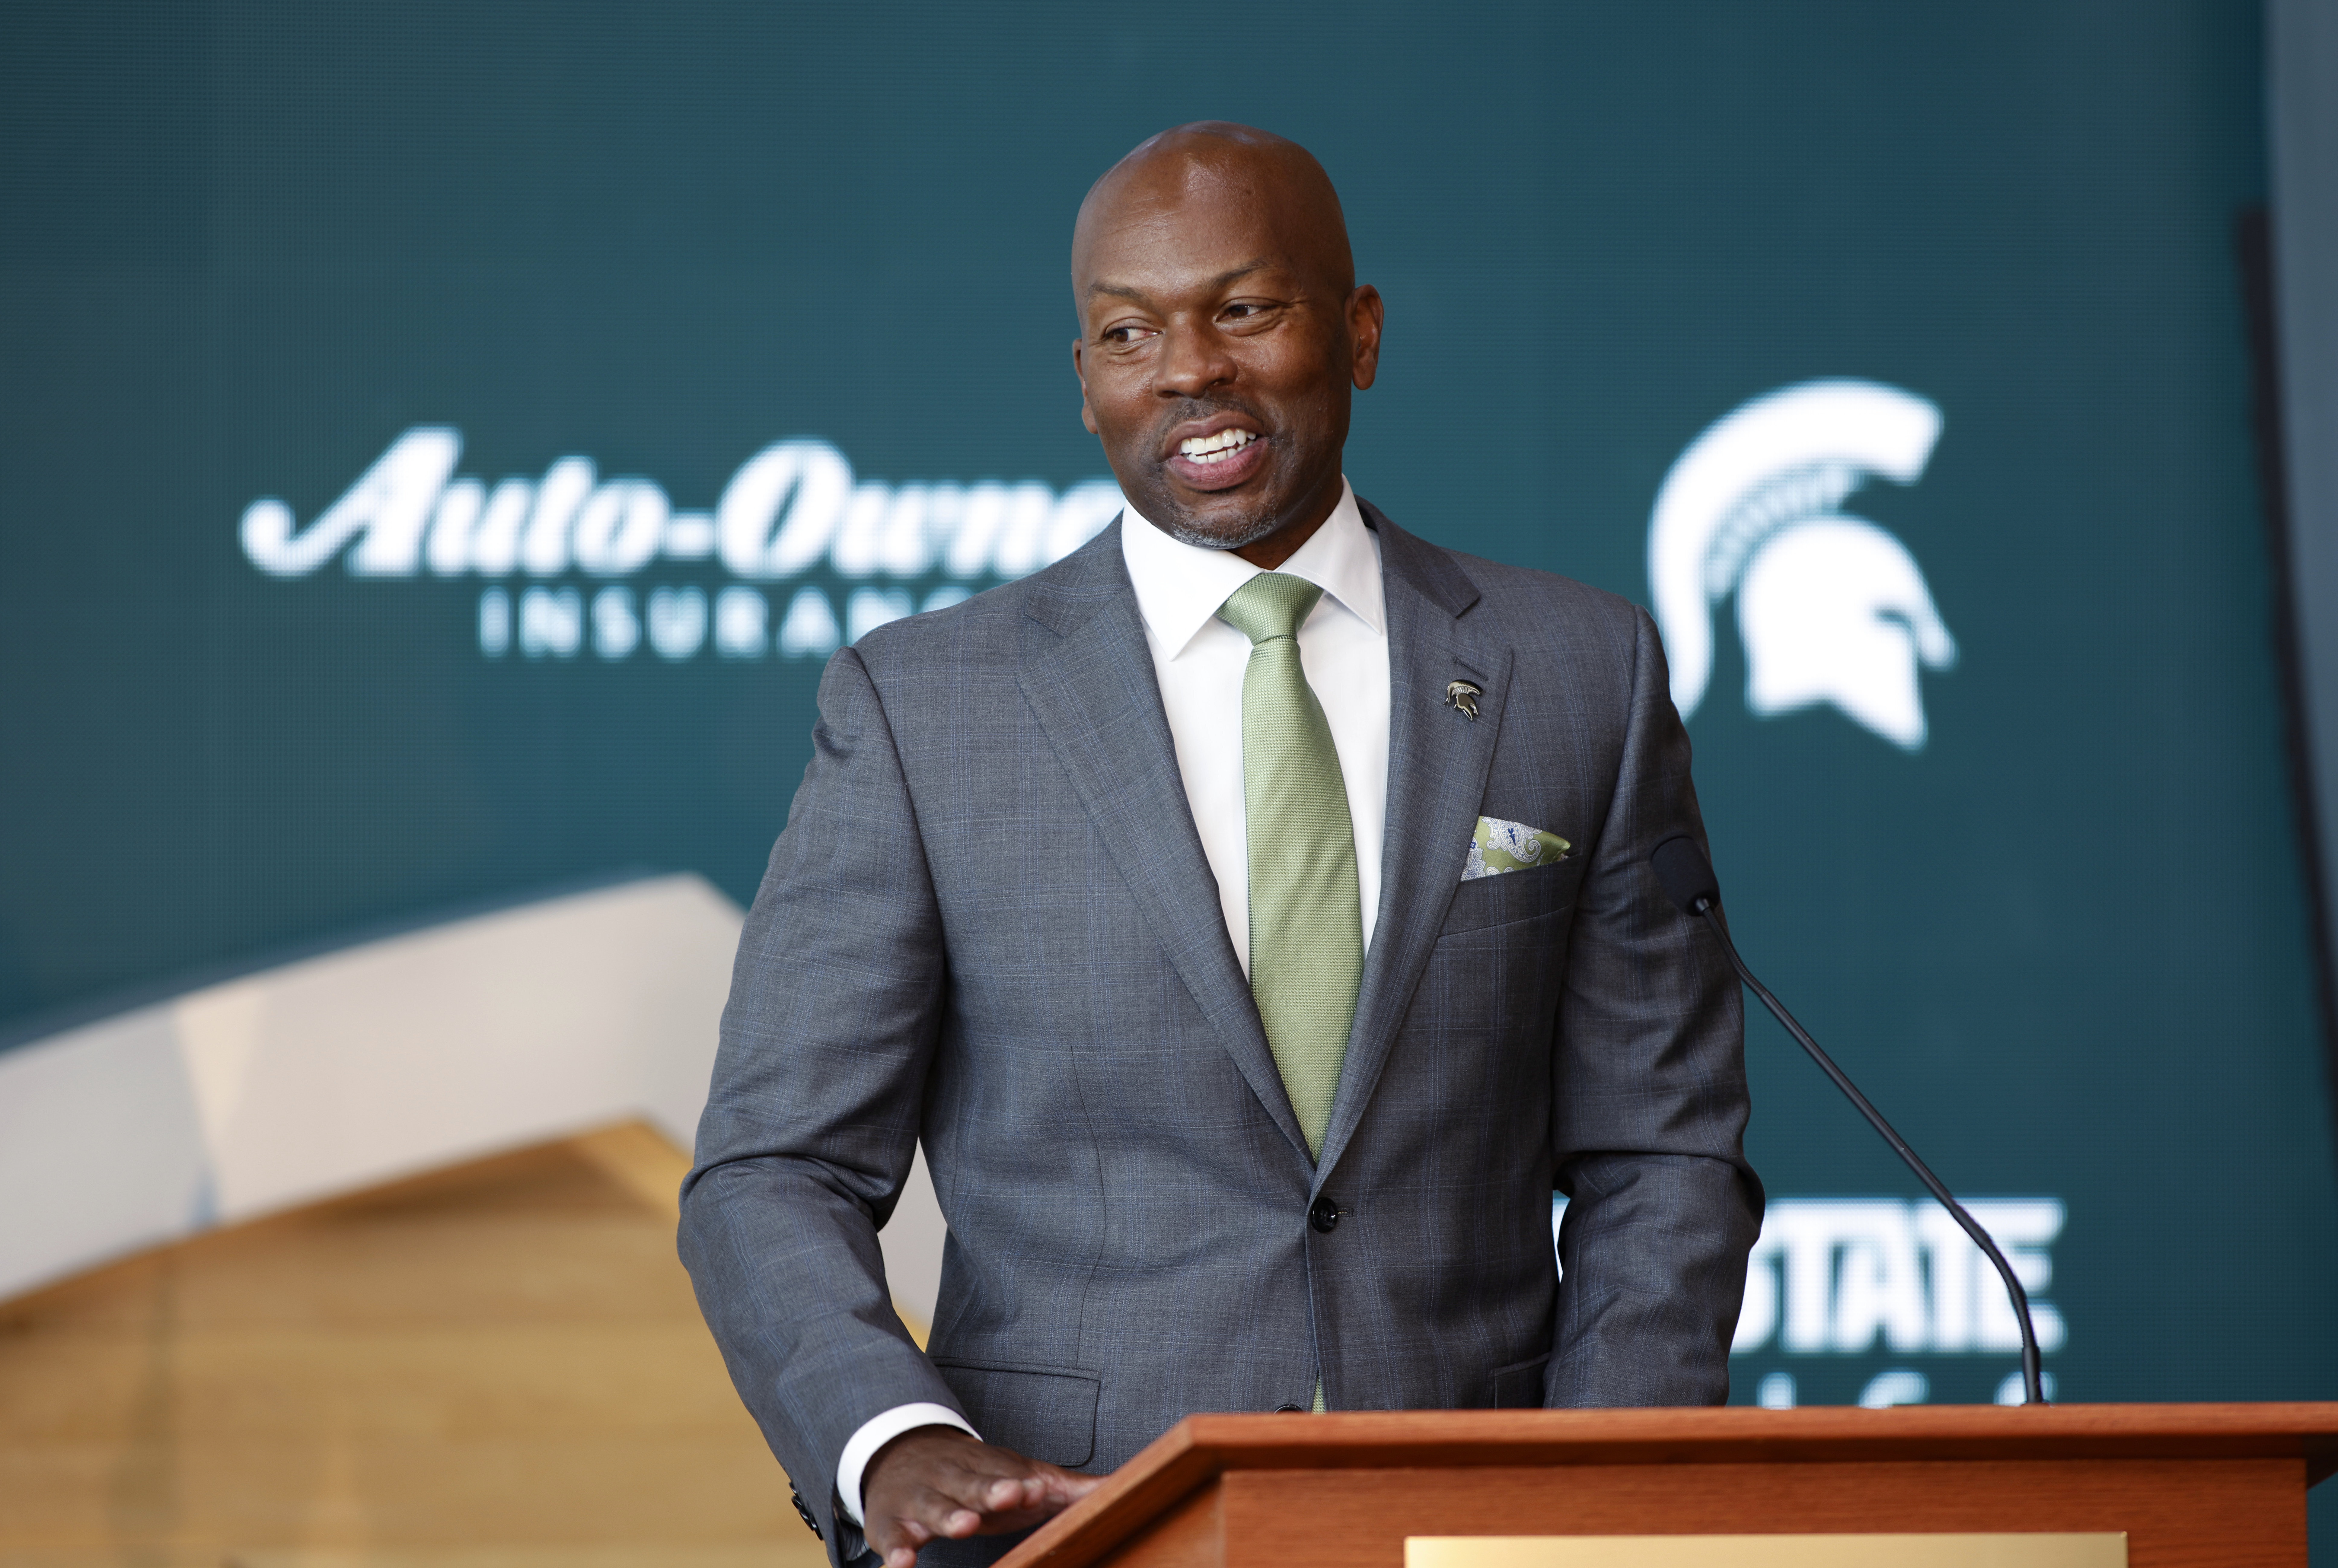 MSU President Appoints Alan Haller as New Athletic Director